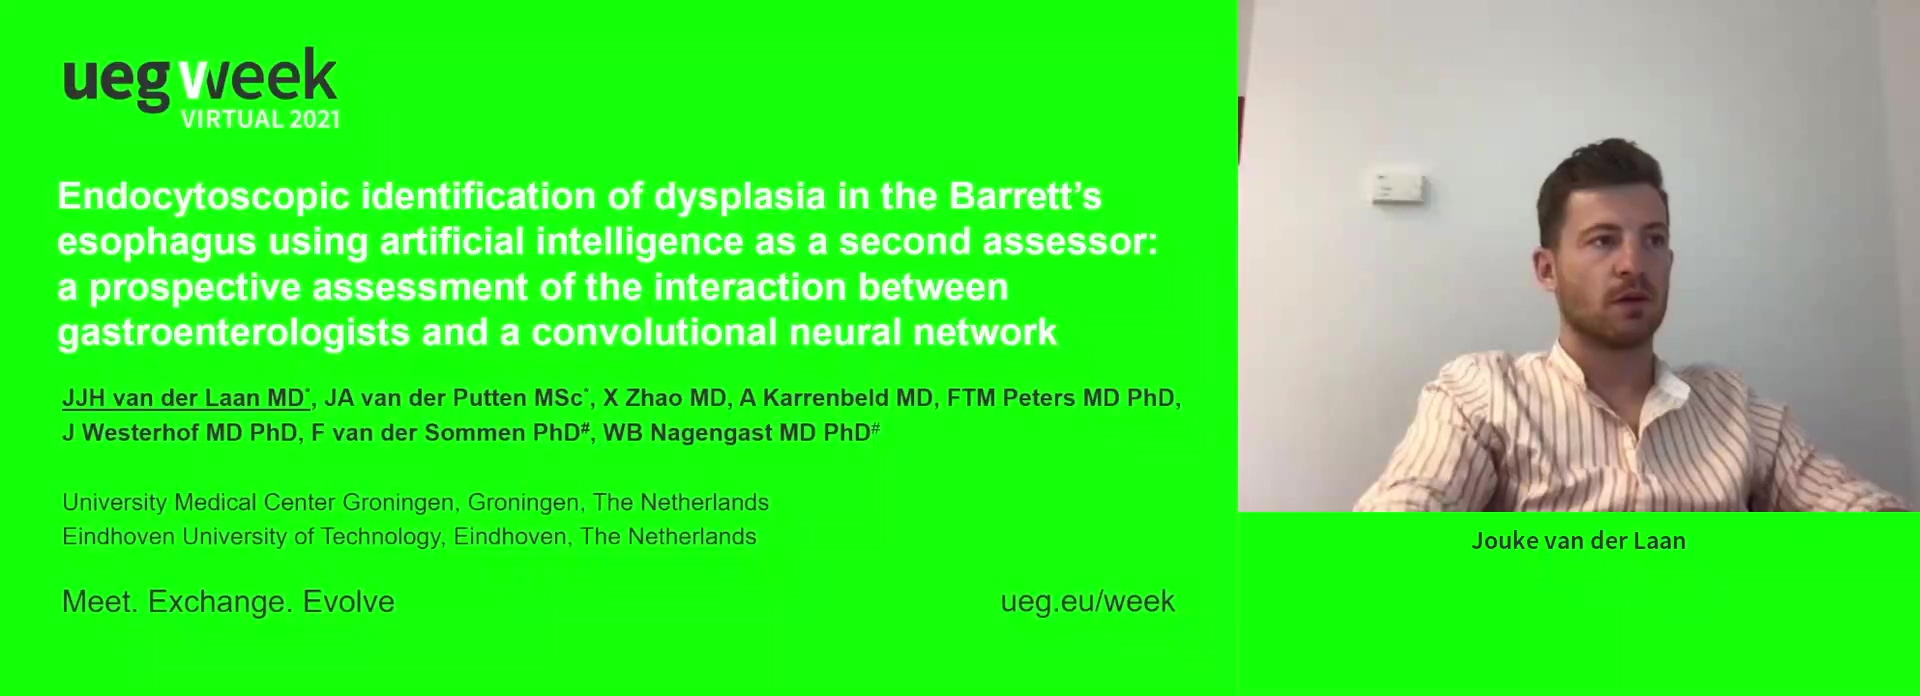 ENDOCYTOSCOPIC IDENTIFICATION OF DYSPLASIA IN THE BARRETT’S OESOPHAGUS USING ARTIFICIAL INTELLIGENCE AS A SECOND ASSESSOR: A PROSPECTIVE ASSESSMENT OF THE INTERACTION BETWEEN GASTROENTEROLOGISTS AND A CONVOLUTIONAL NEURAL NETWORK ALGORITHM